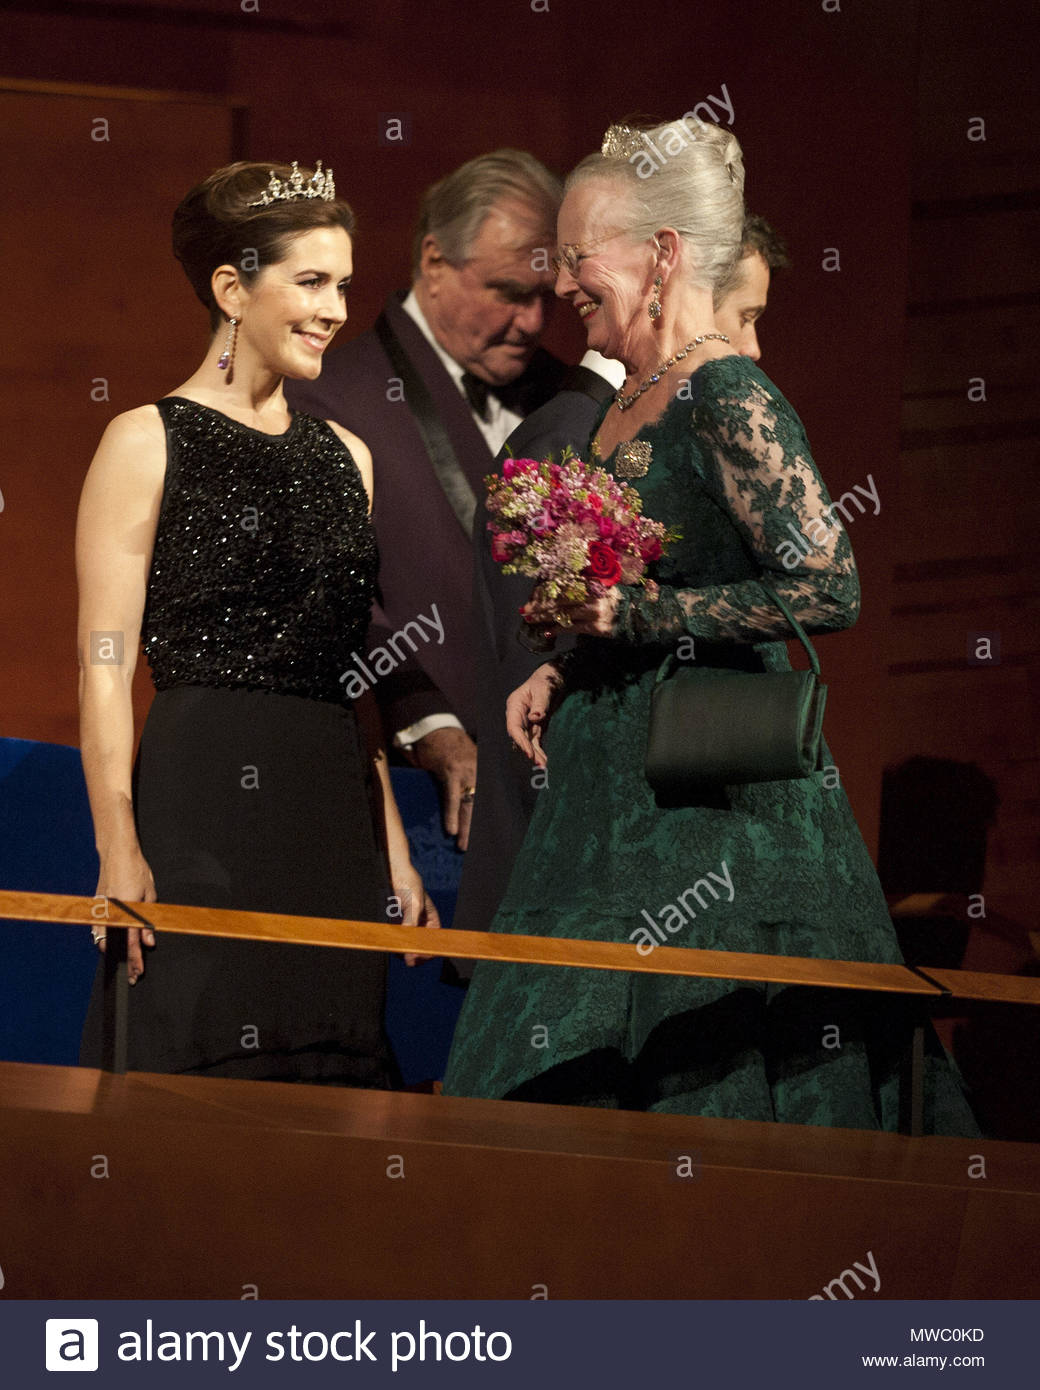 princess-mary-prince-henrik-and-queen-margrethe-ii-of-denmark-gala-at-the-concert-hall-in-copenhaegn-celebrating-the-40th-jubilee-of-queen-margrethe-of-denmark-MWC0KD.jpg